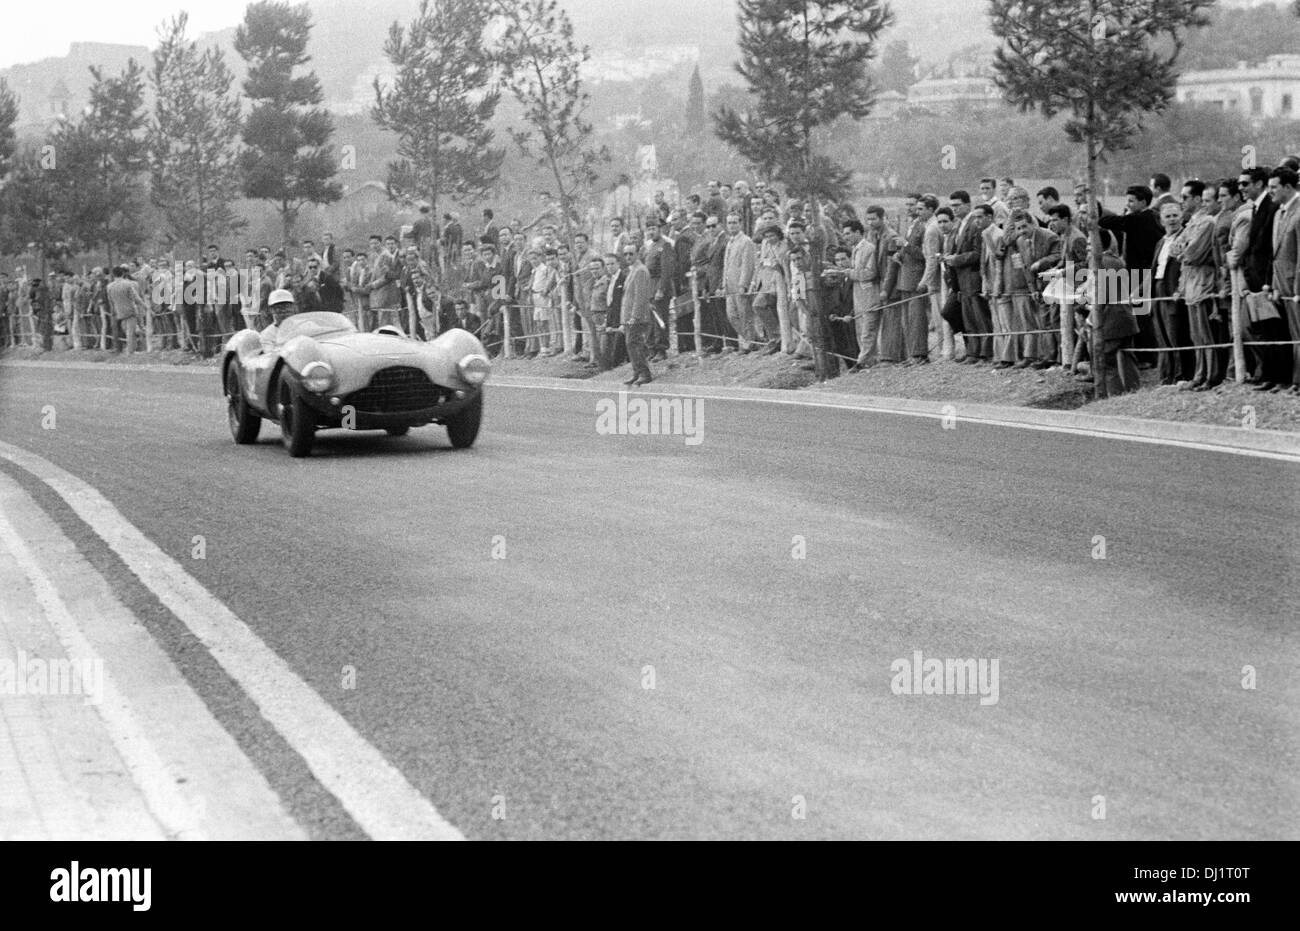 Aston Martin DB3S, one of the Kangaroo Stable team cars at the Spanish Grand Prix, Pedralbes, Spain 24 Oct 1954. Stock Photo